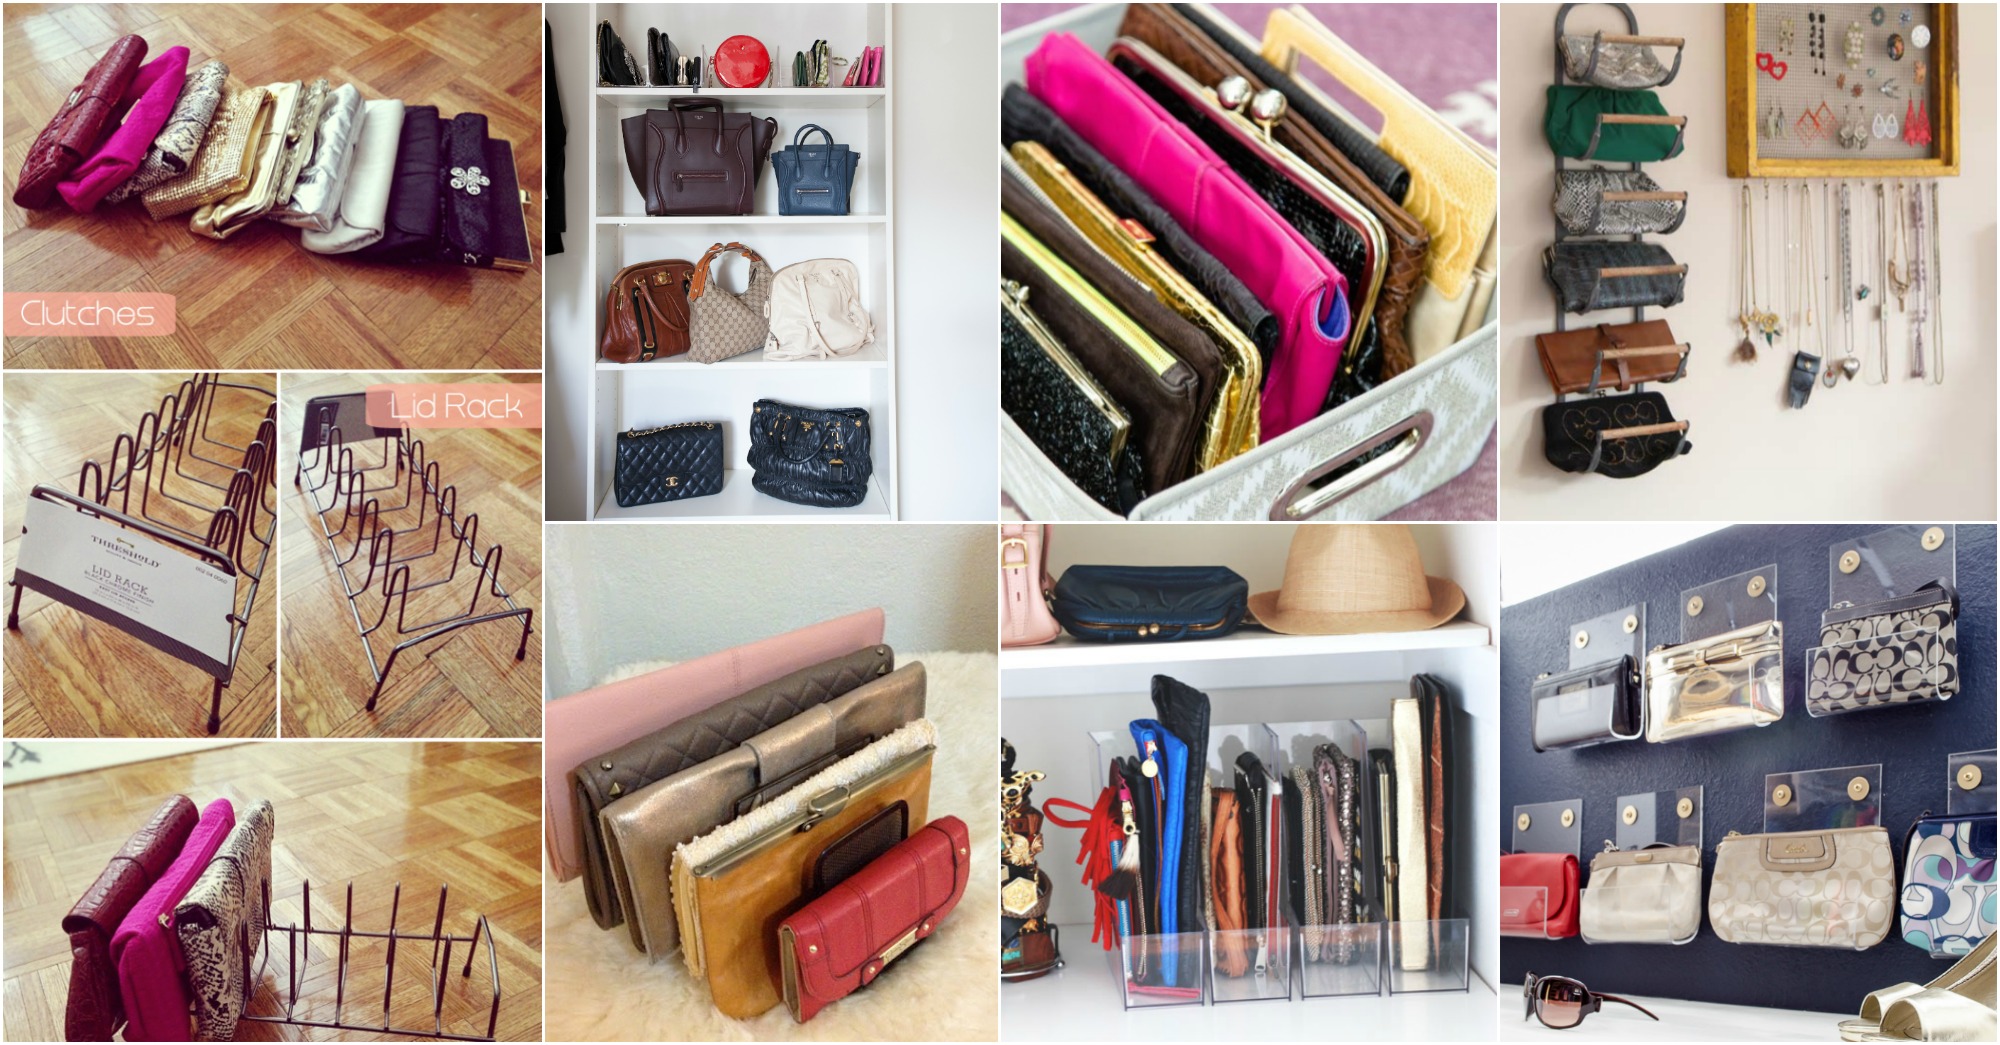 10 Fantastic Ways Of How To Organize Purses And Clutches - fashionsy.com